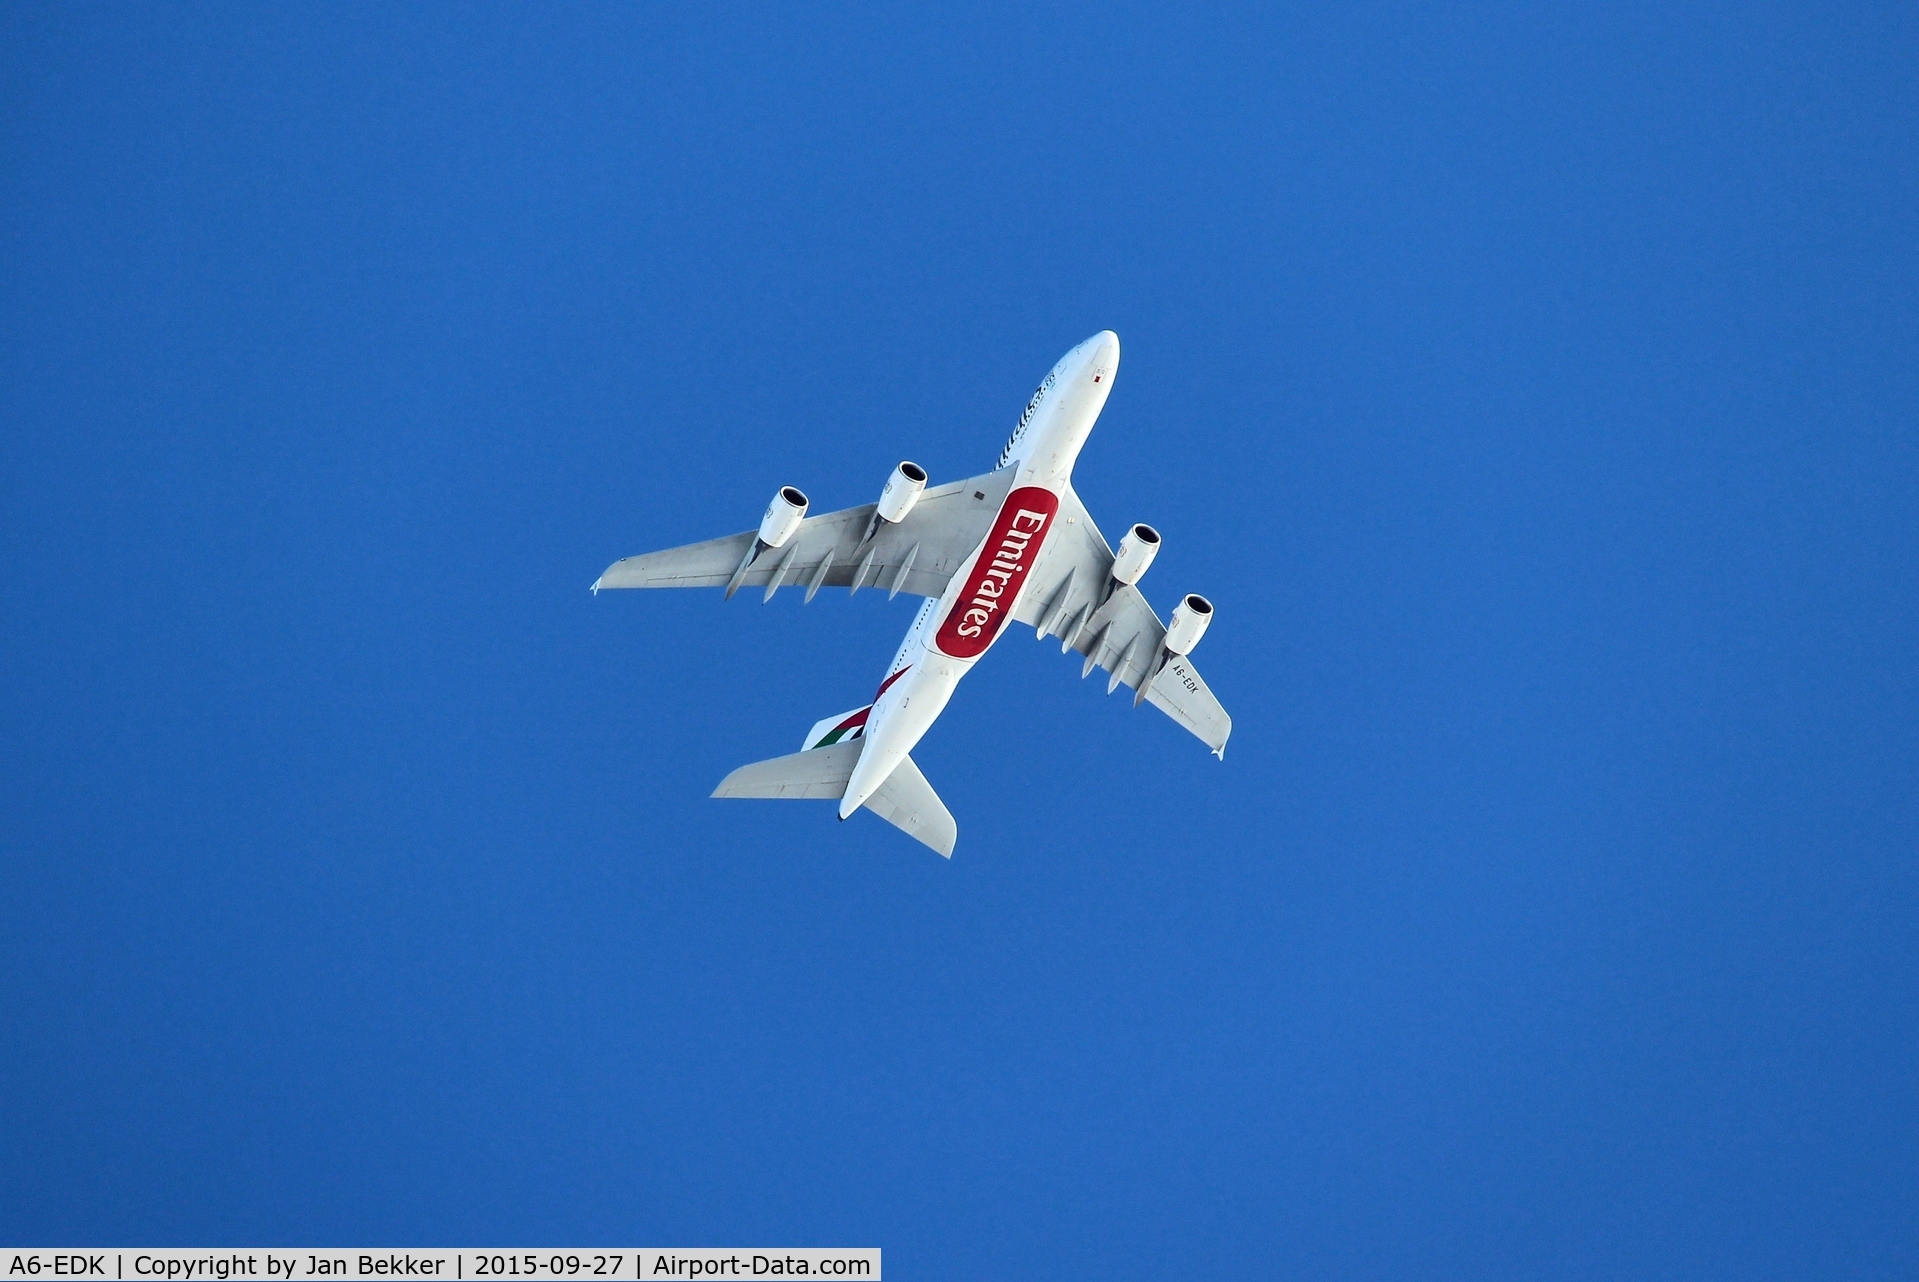 A6-EDK, 2010 Airbus A380-861 C/N 030, Flying at 10.000 feet over Lelystad to Schiphol